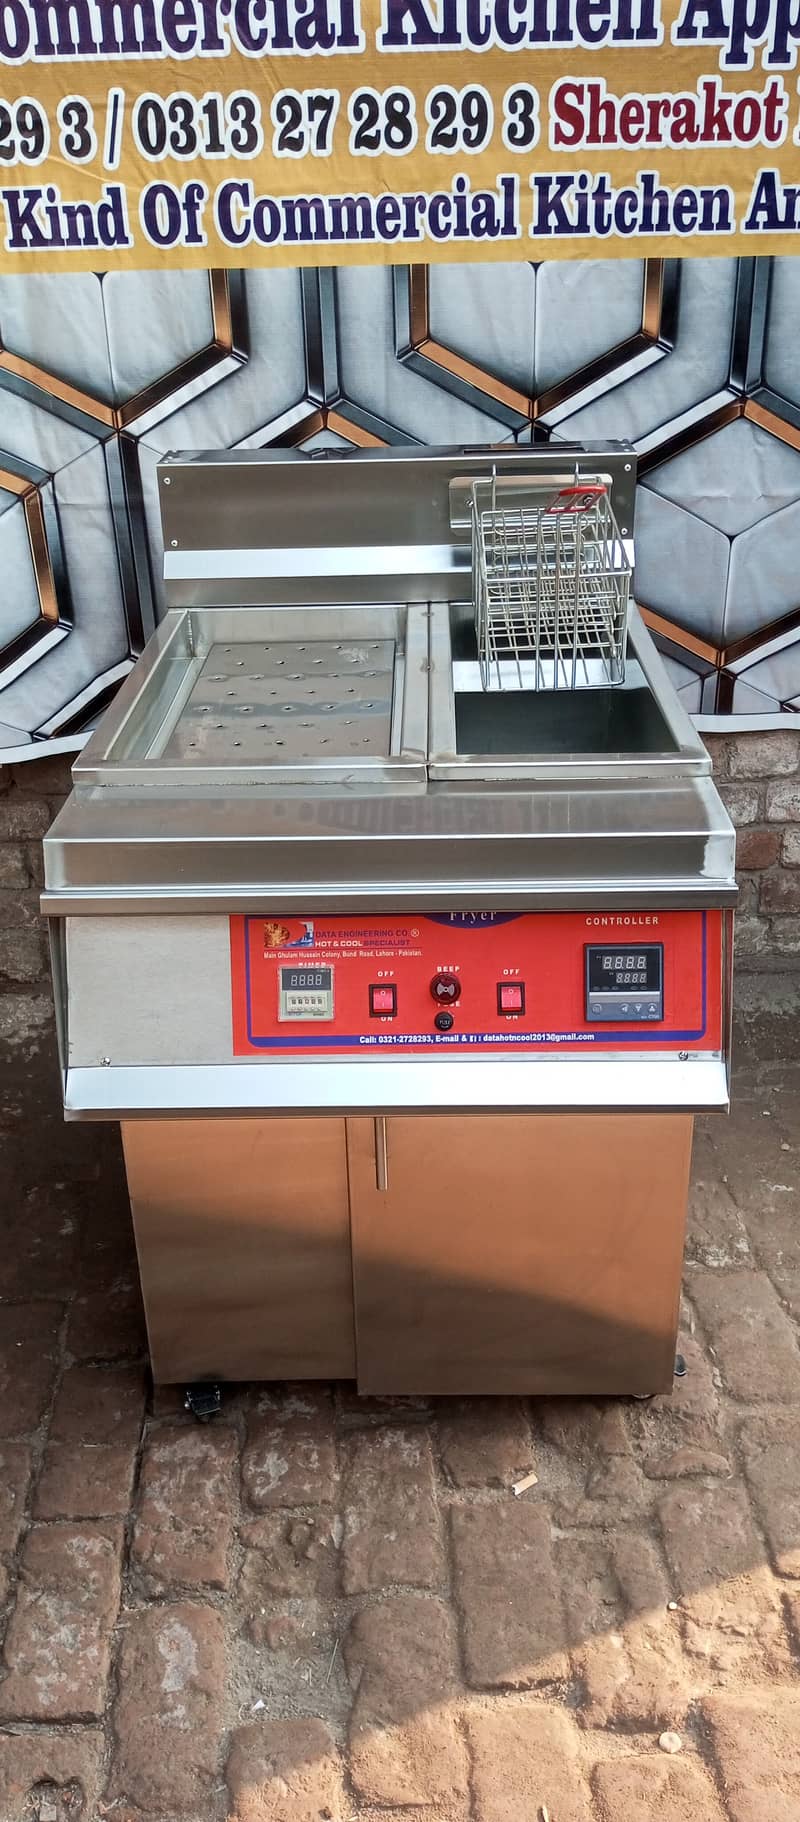 Deep Fryer Hotplate Prep Table Commercial Kitchen Equipment Fast food 5